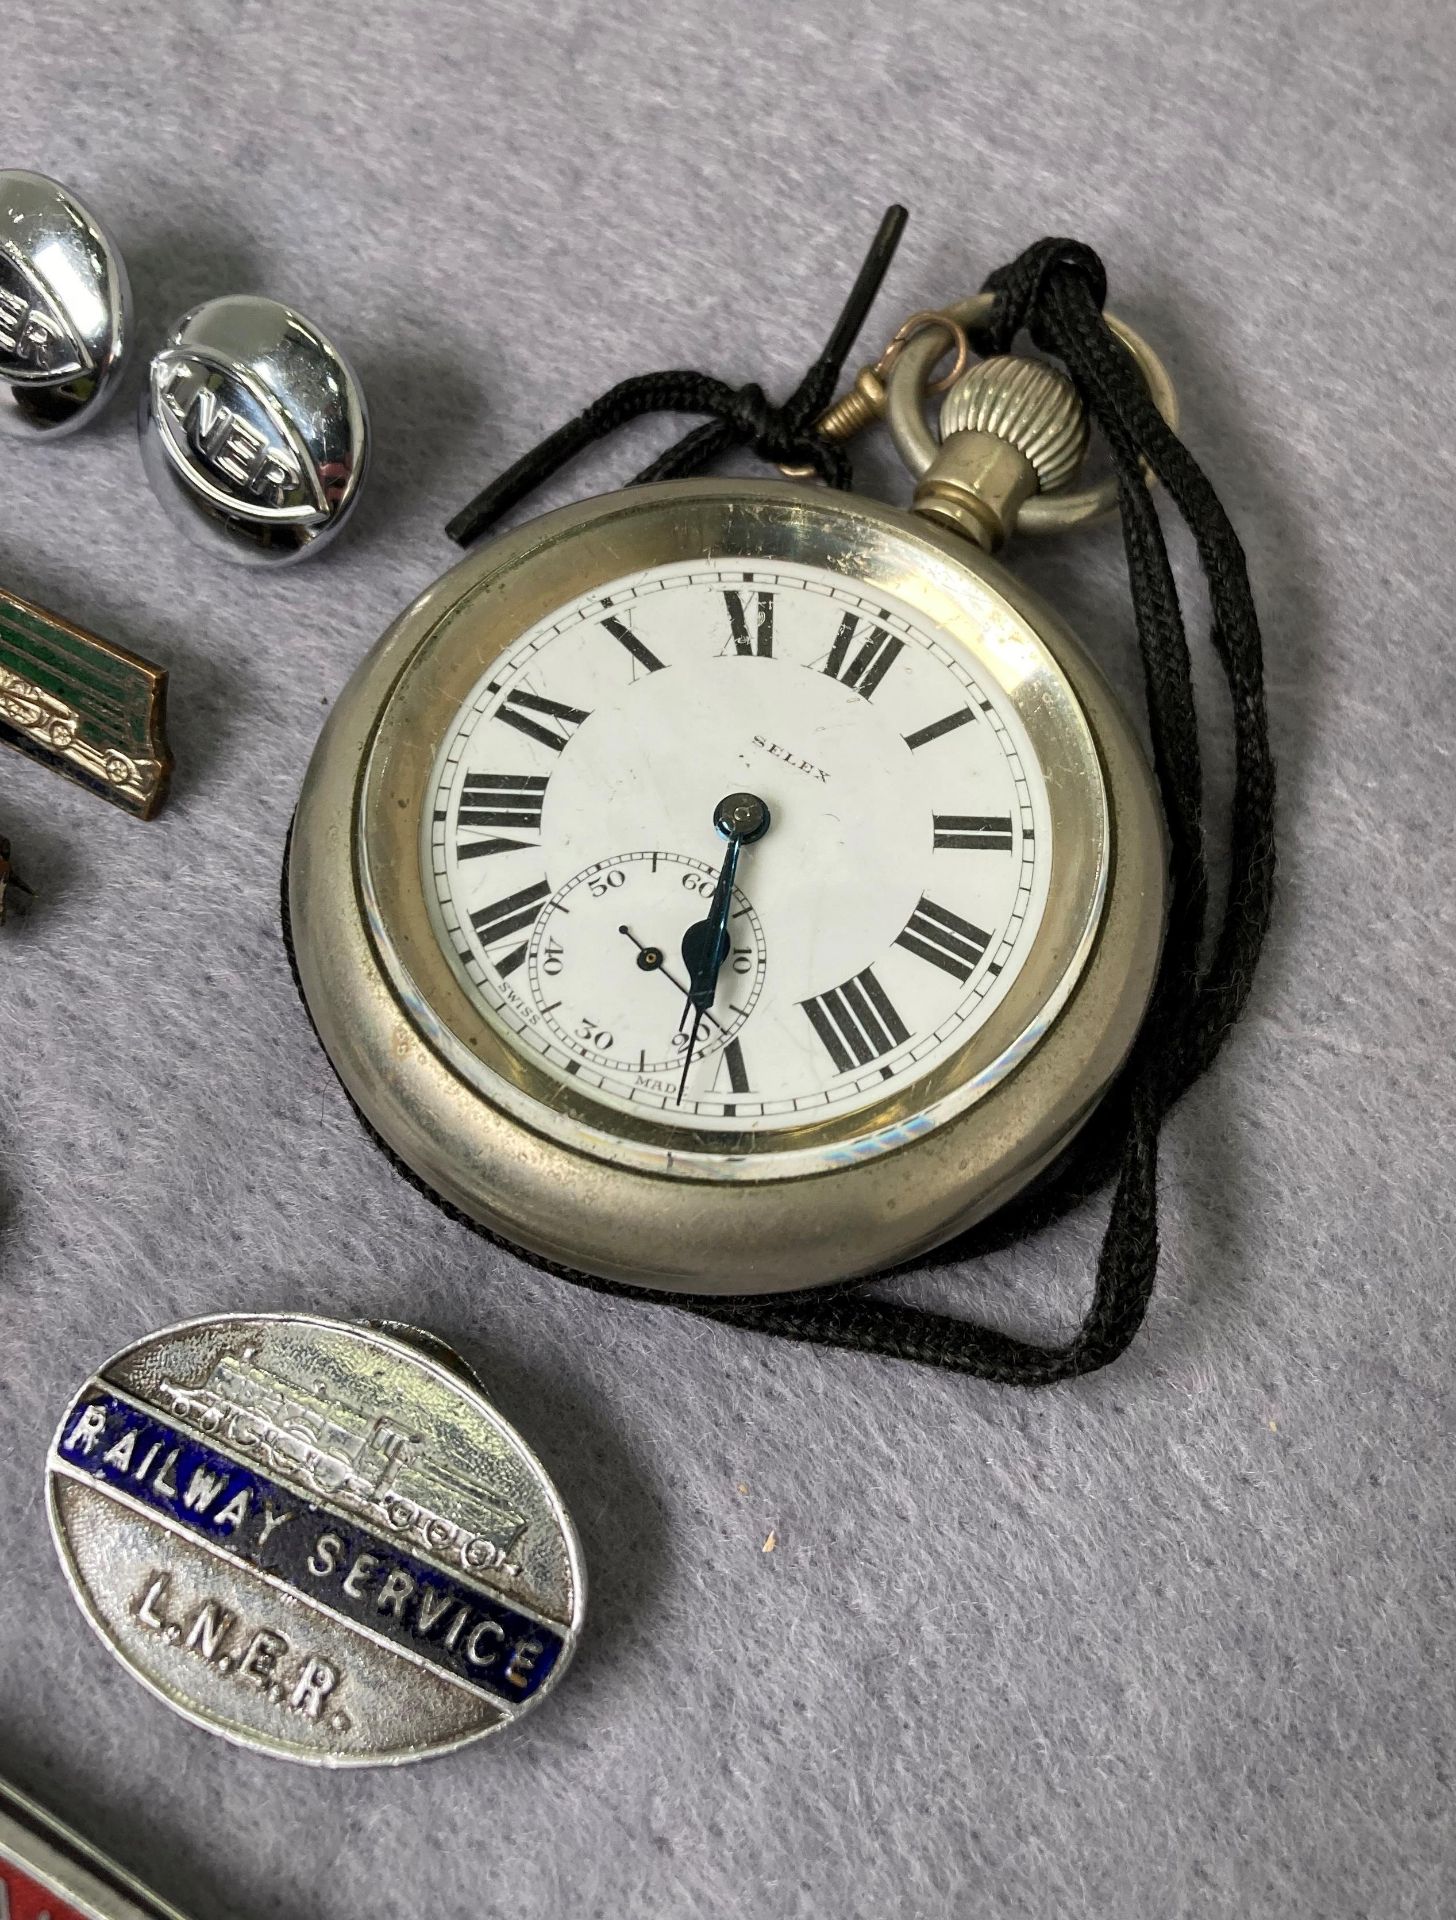 Selex pocket watch (working) with "LNER 9176 Relief" engraved to back, railway badges, cap badge, - Image 2 of 5